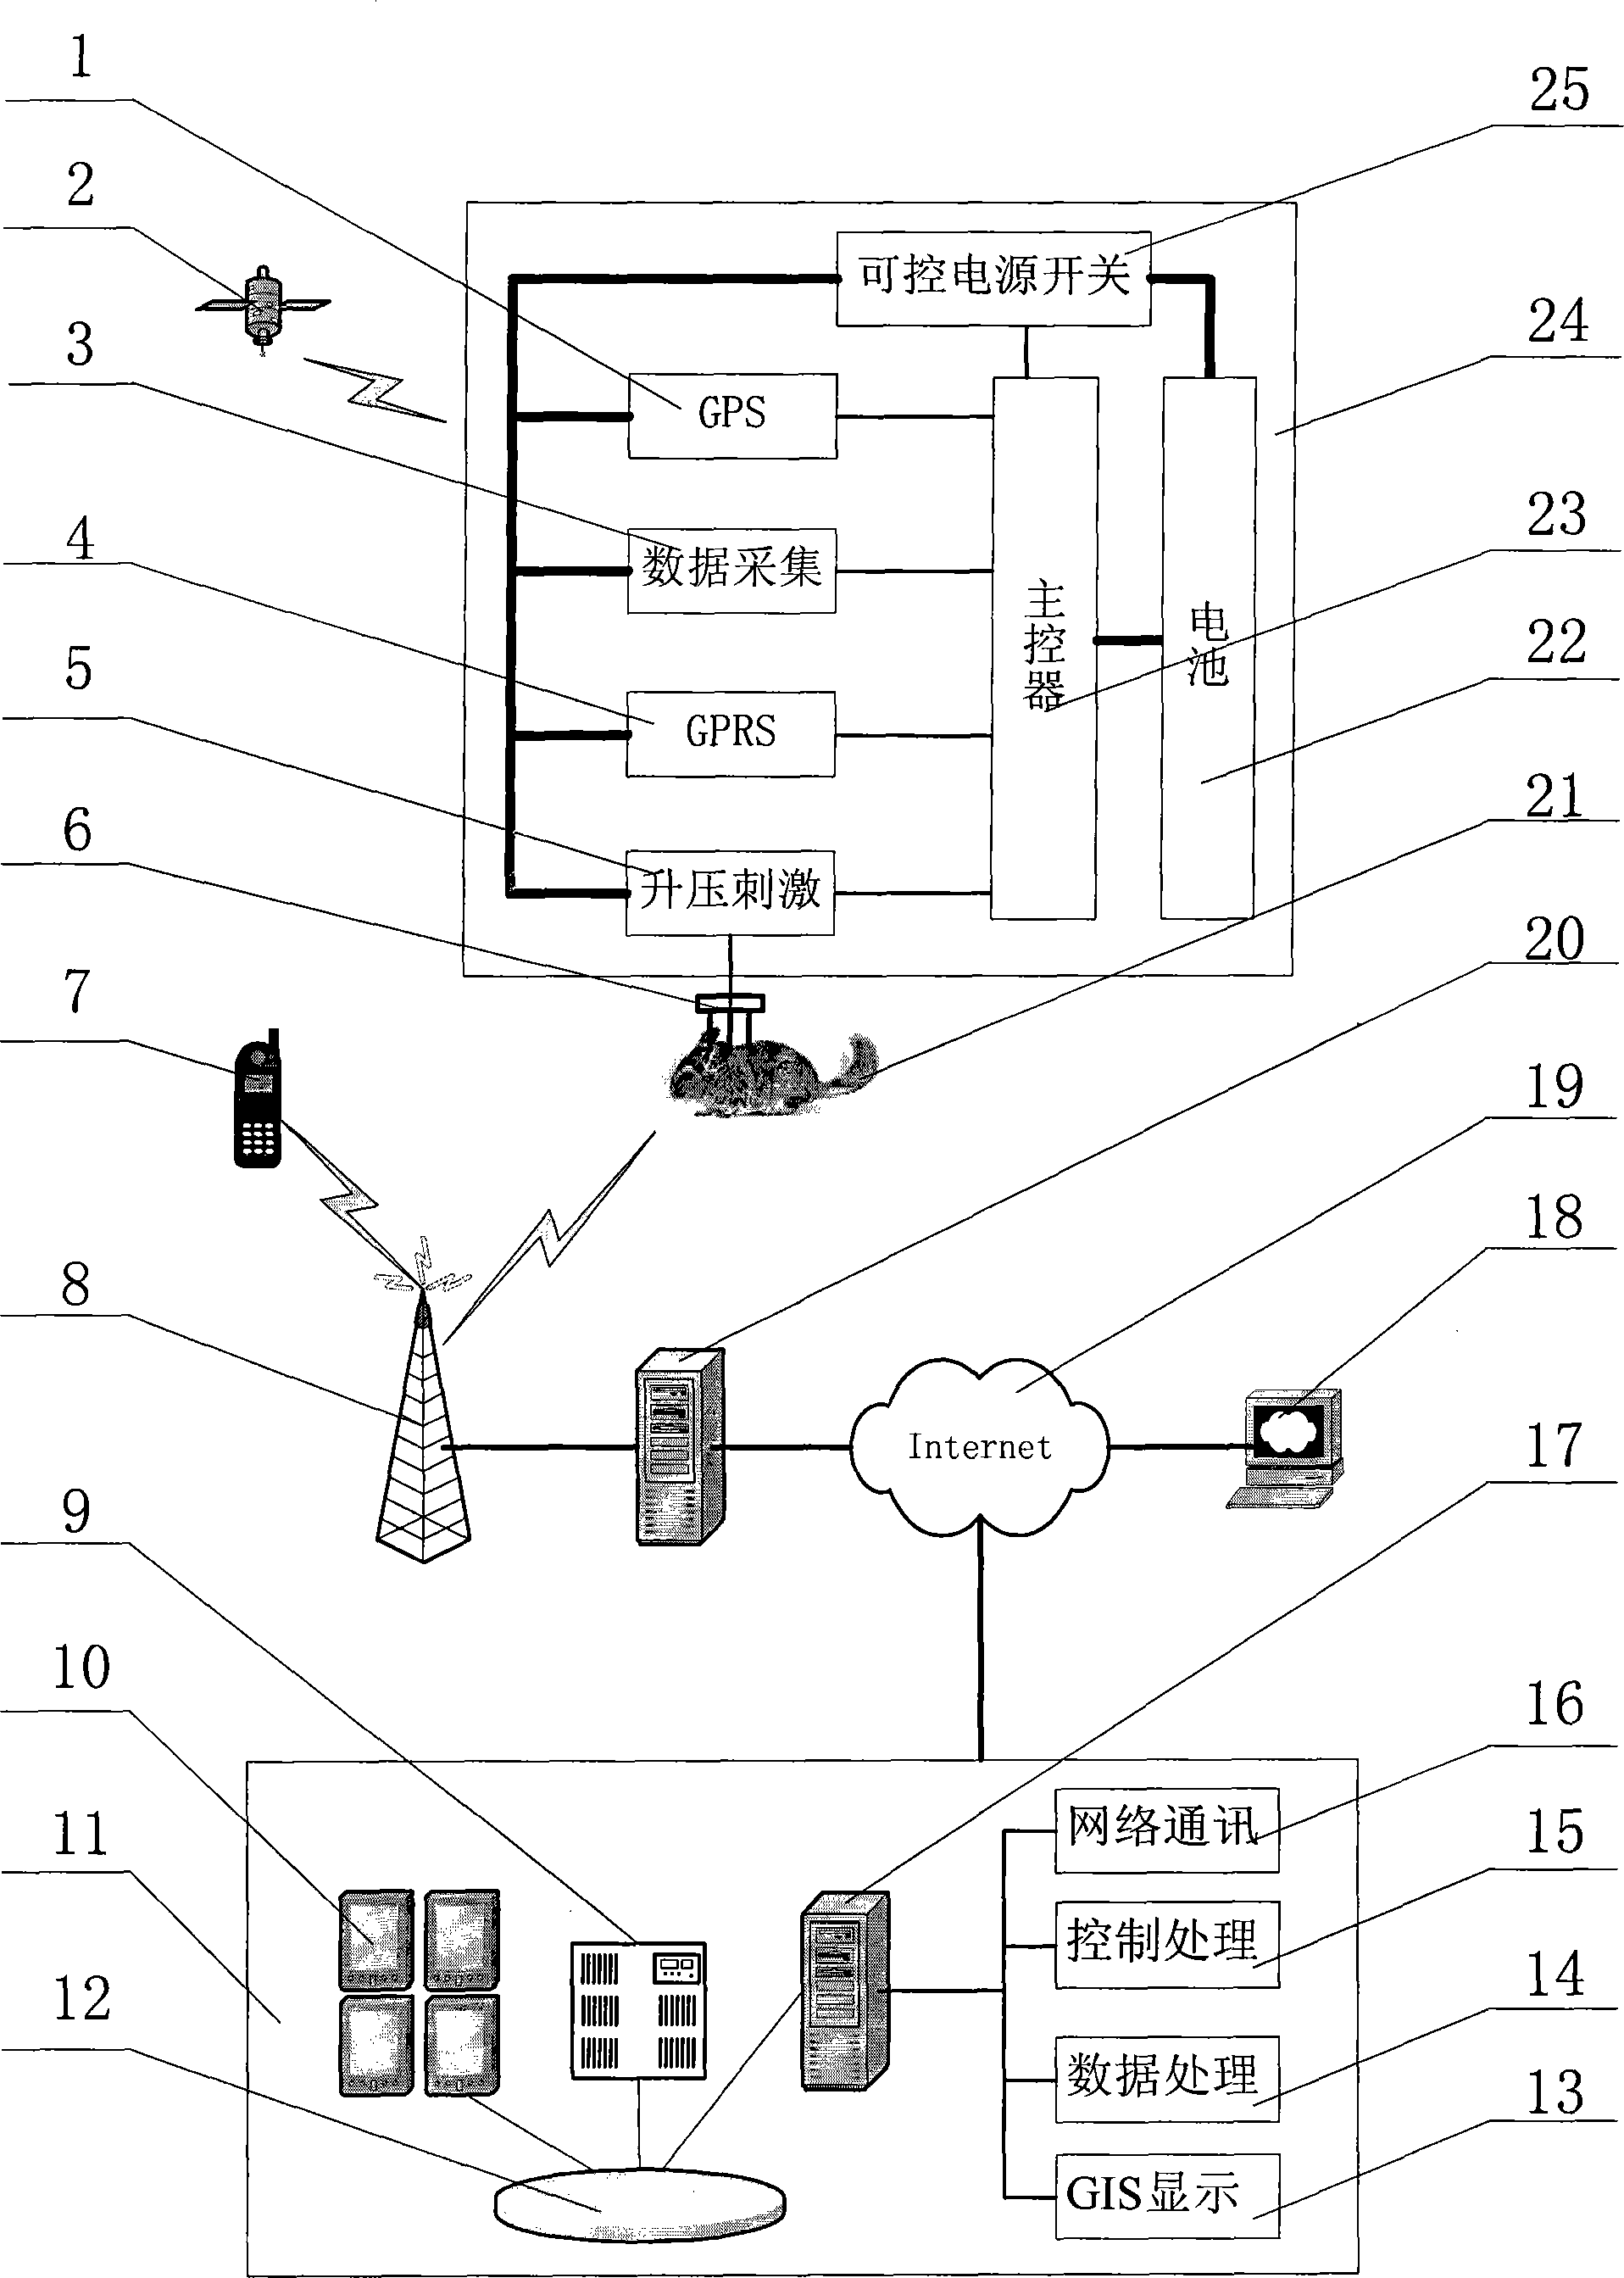 Method for remotely and intelligently monitoring animal robot in the open